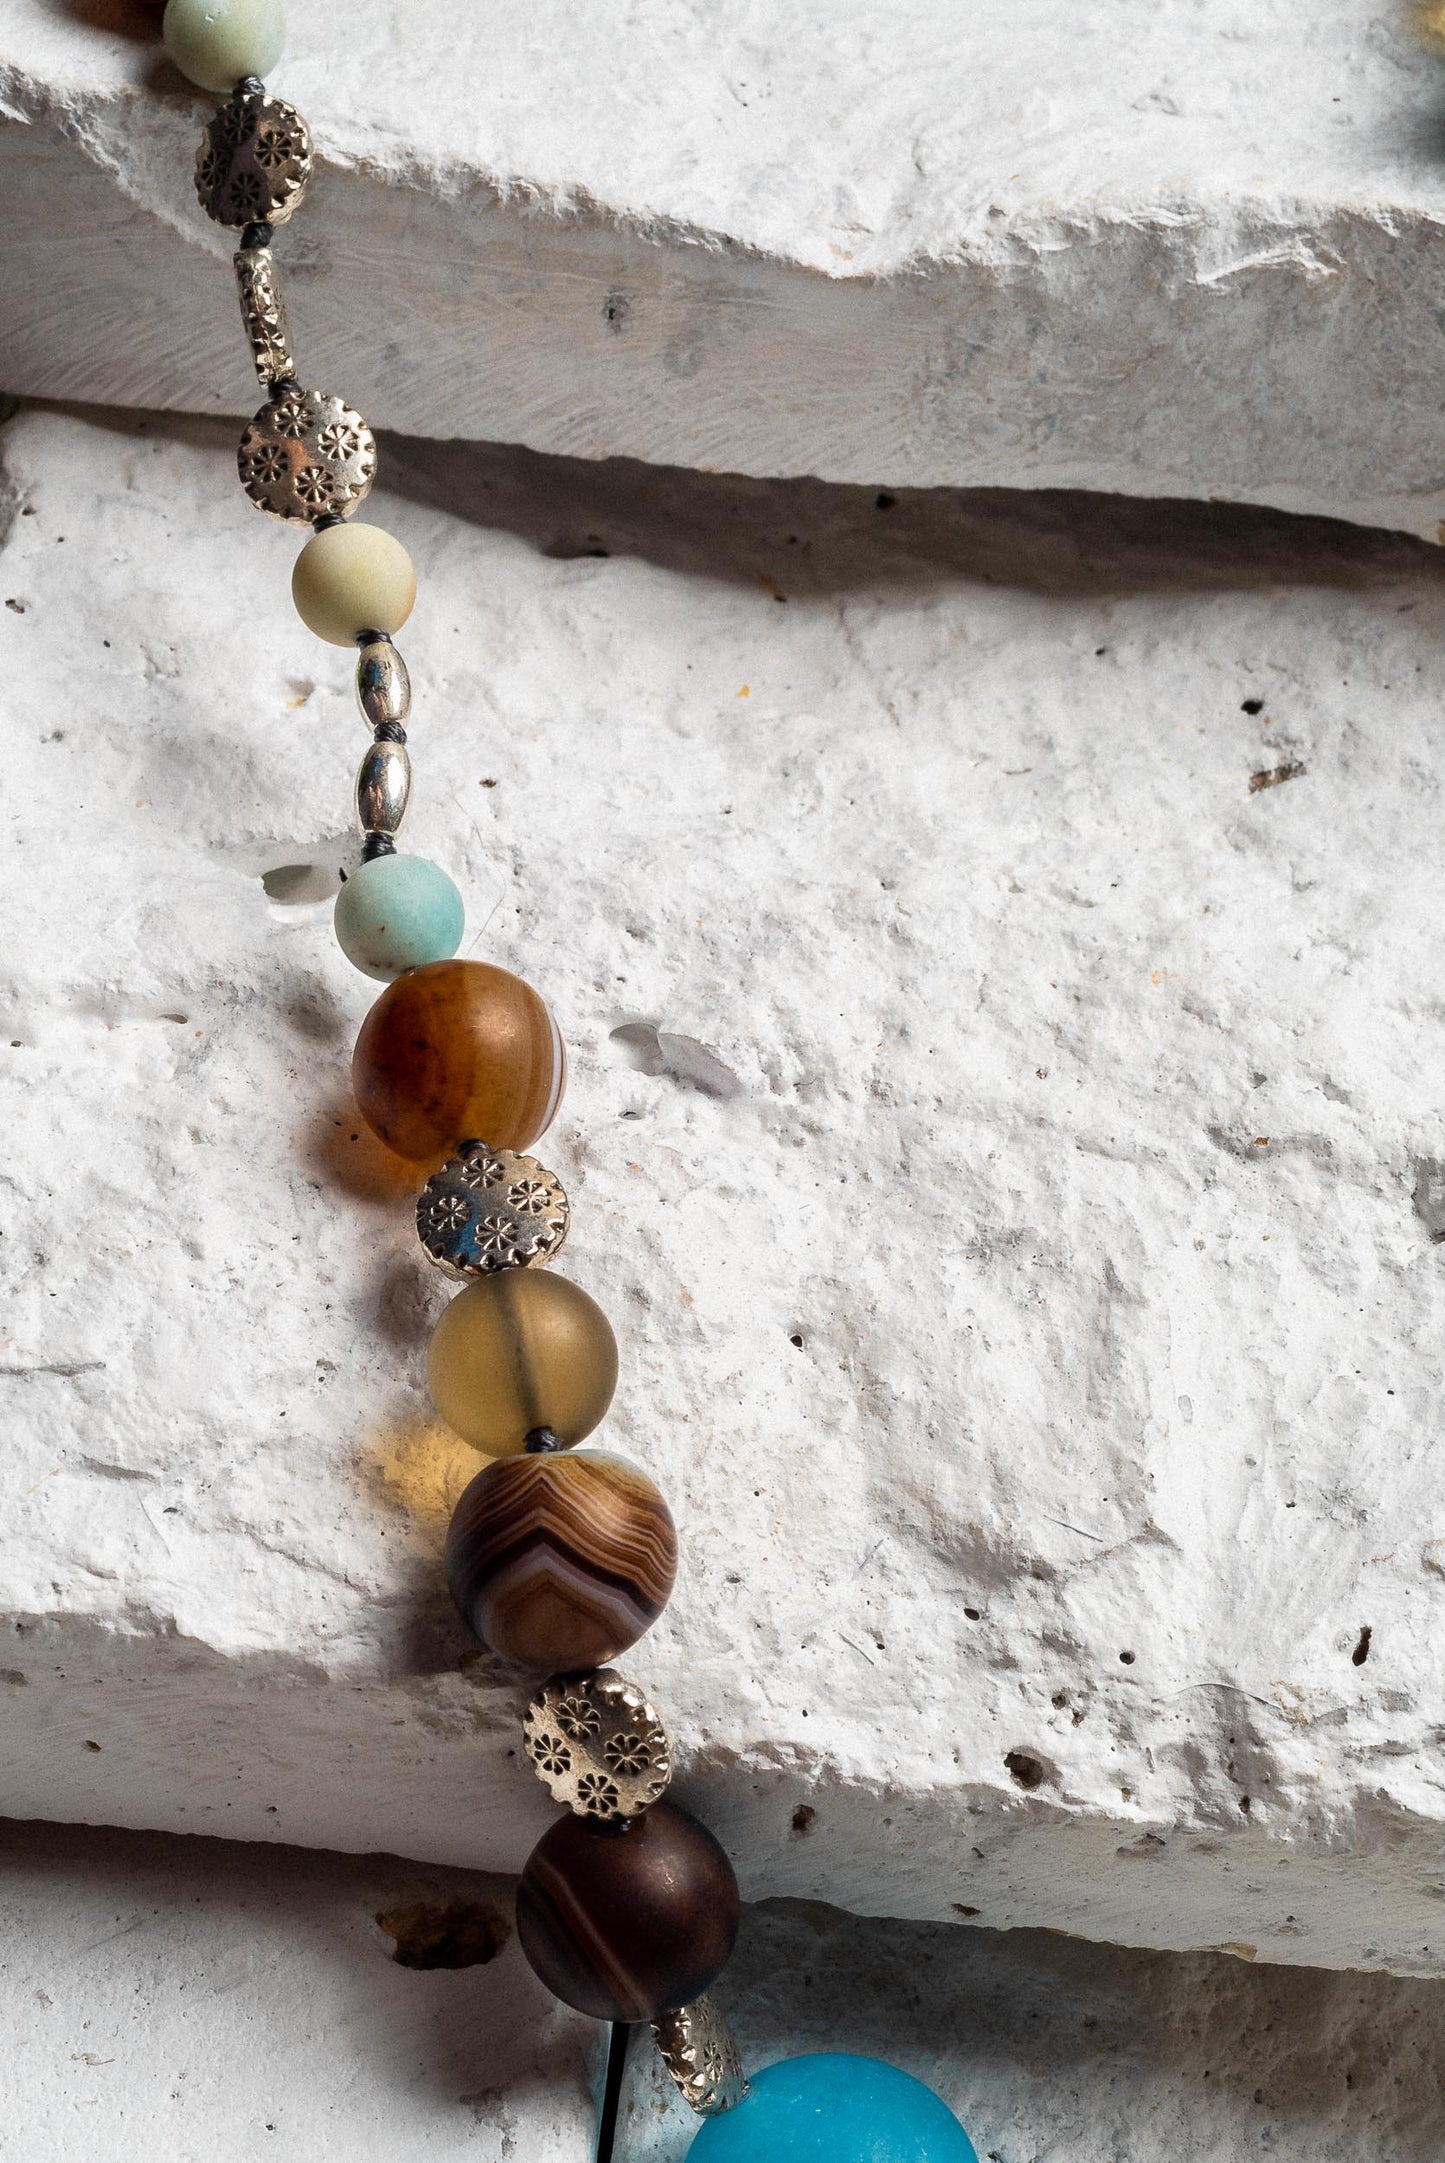 A close up of the variety of brown beads, some striped and some frosted glass